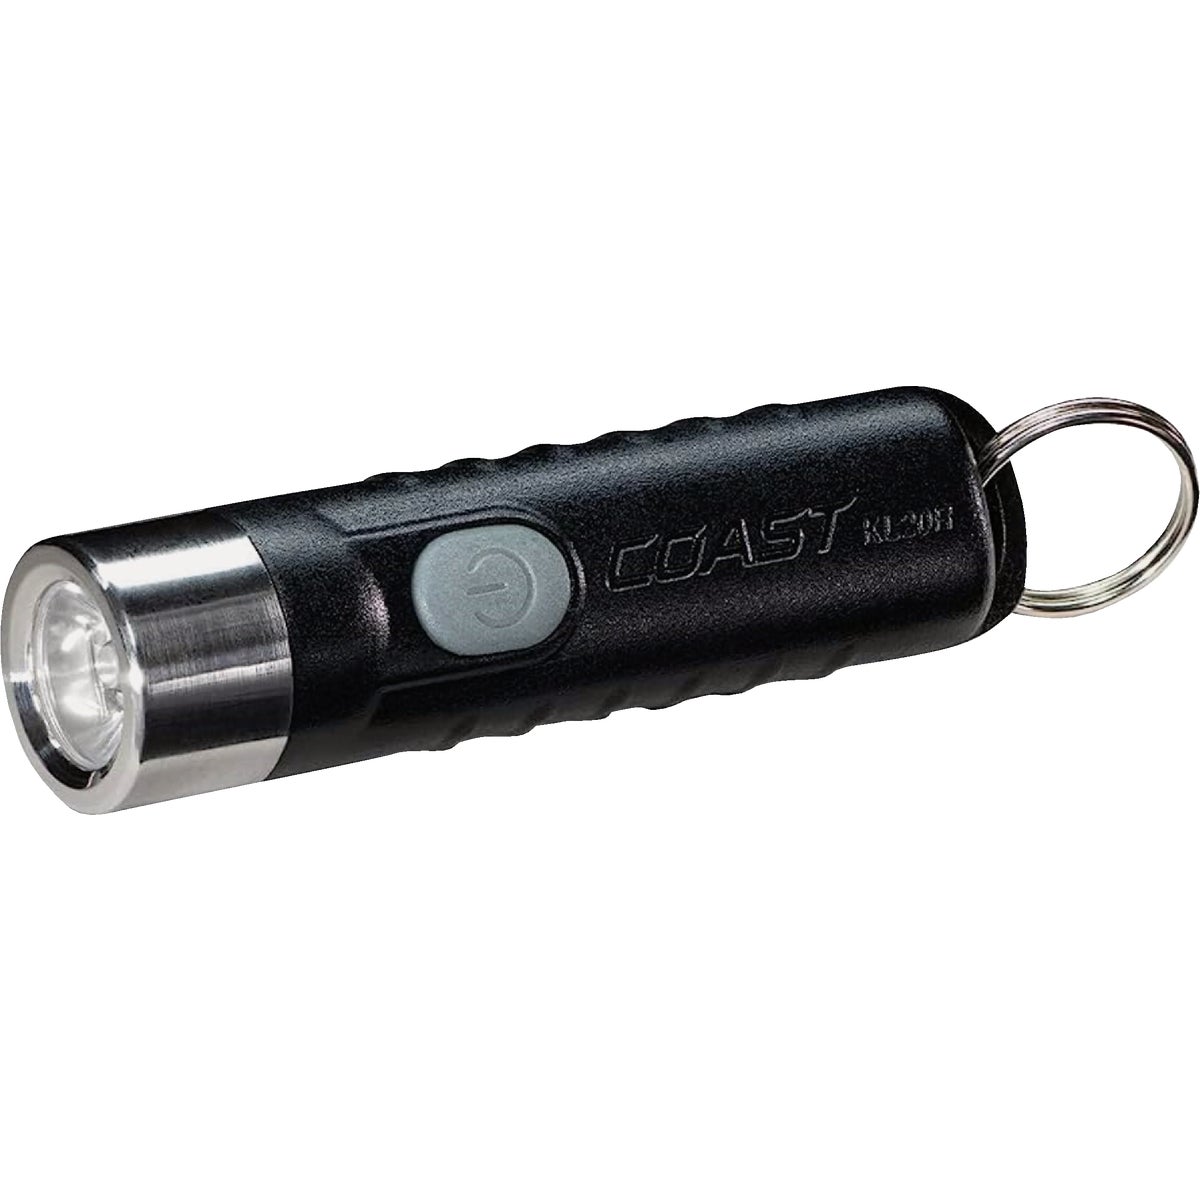 Coast KL20R Rechargeable 380 Lm. LED Key Chain Light